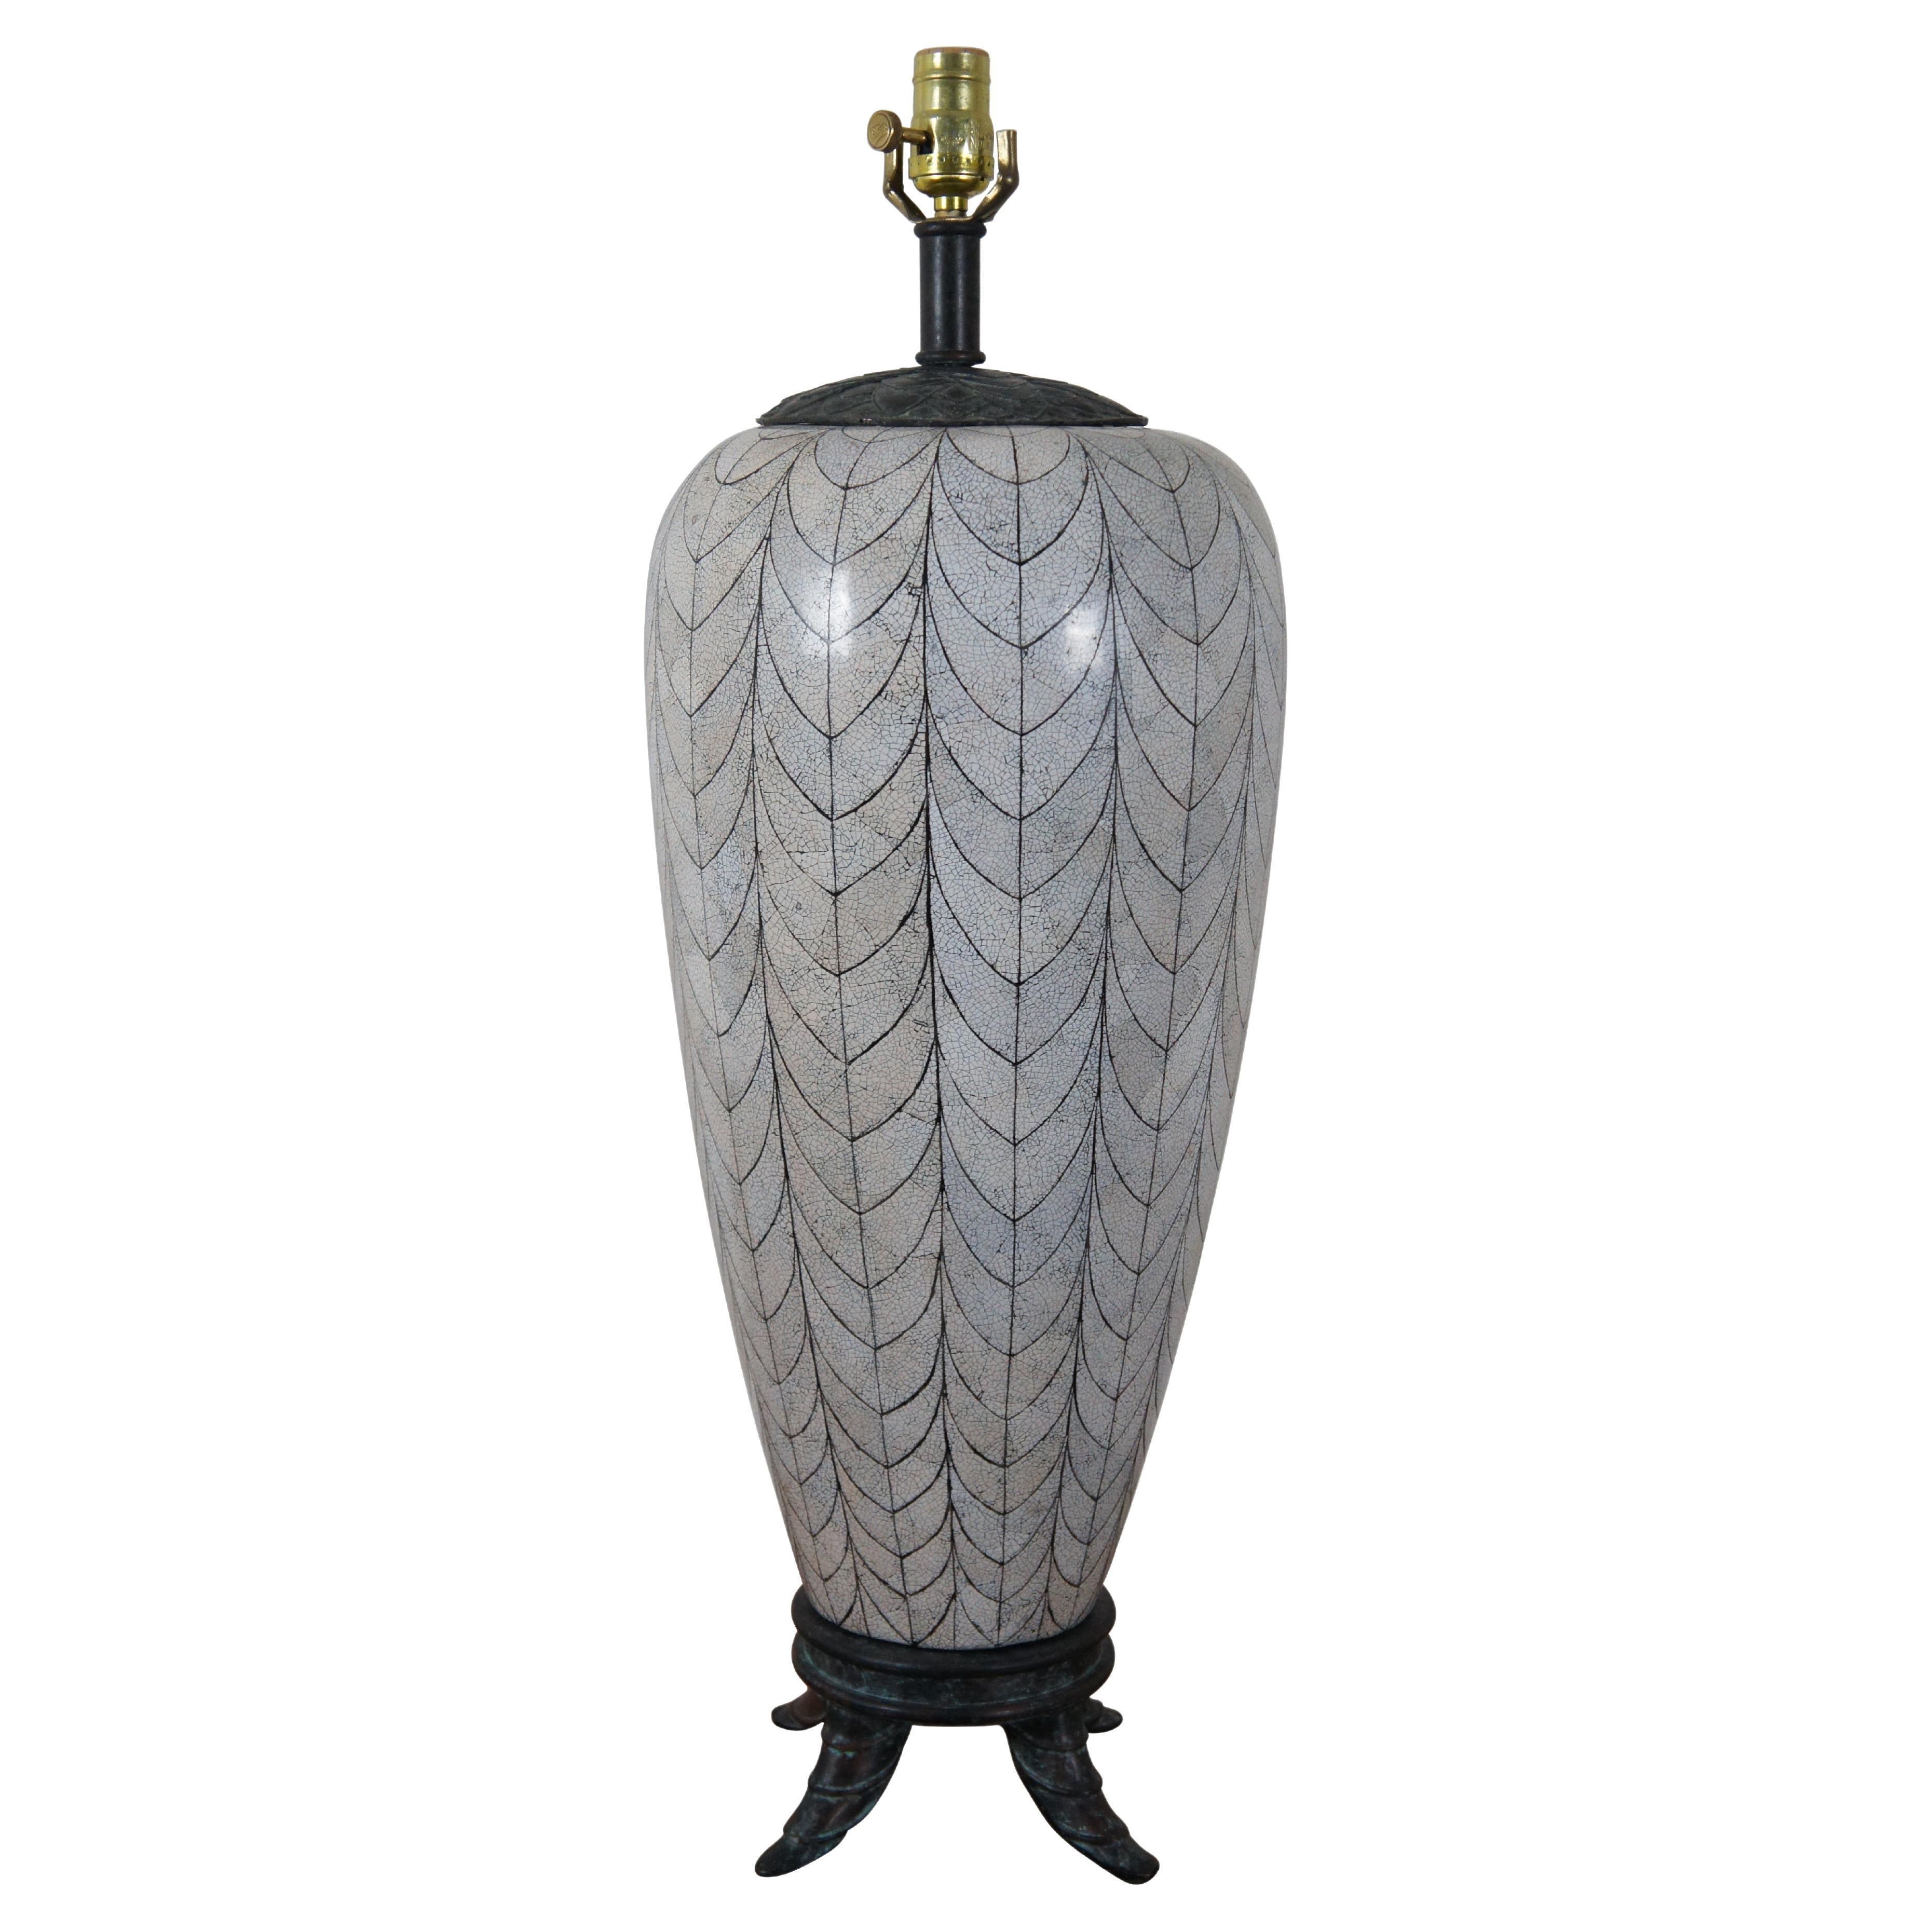 Maitland Smith Bronze & Shell Mosaic Footed Ginger Jar Urn Table Lamp 30" (lampe de table)